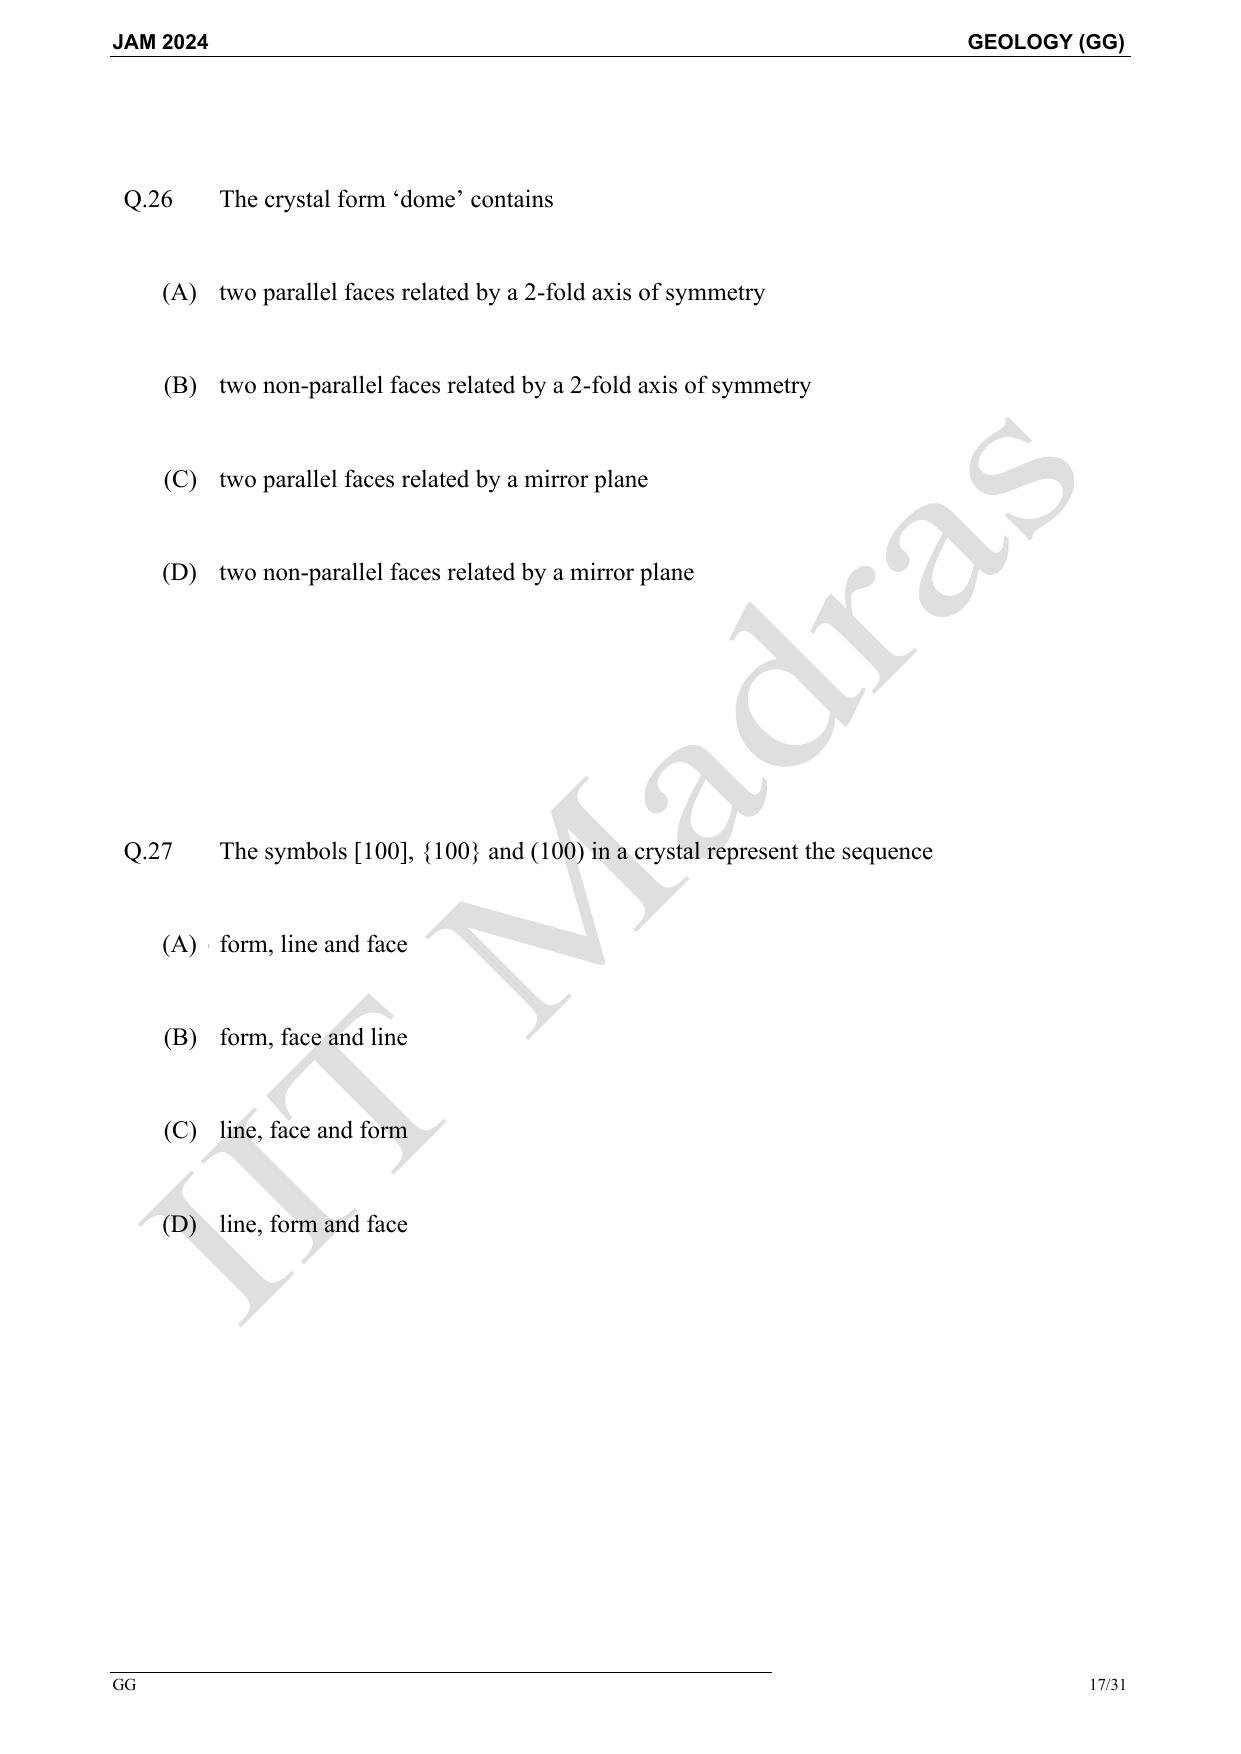 IIT JAM 2024 Geology (GG) Master Question Paper - Page 17